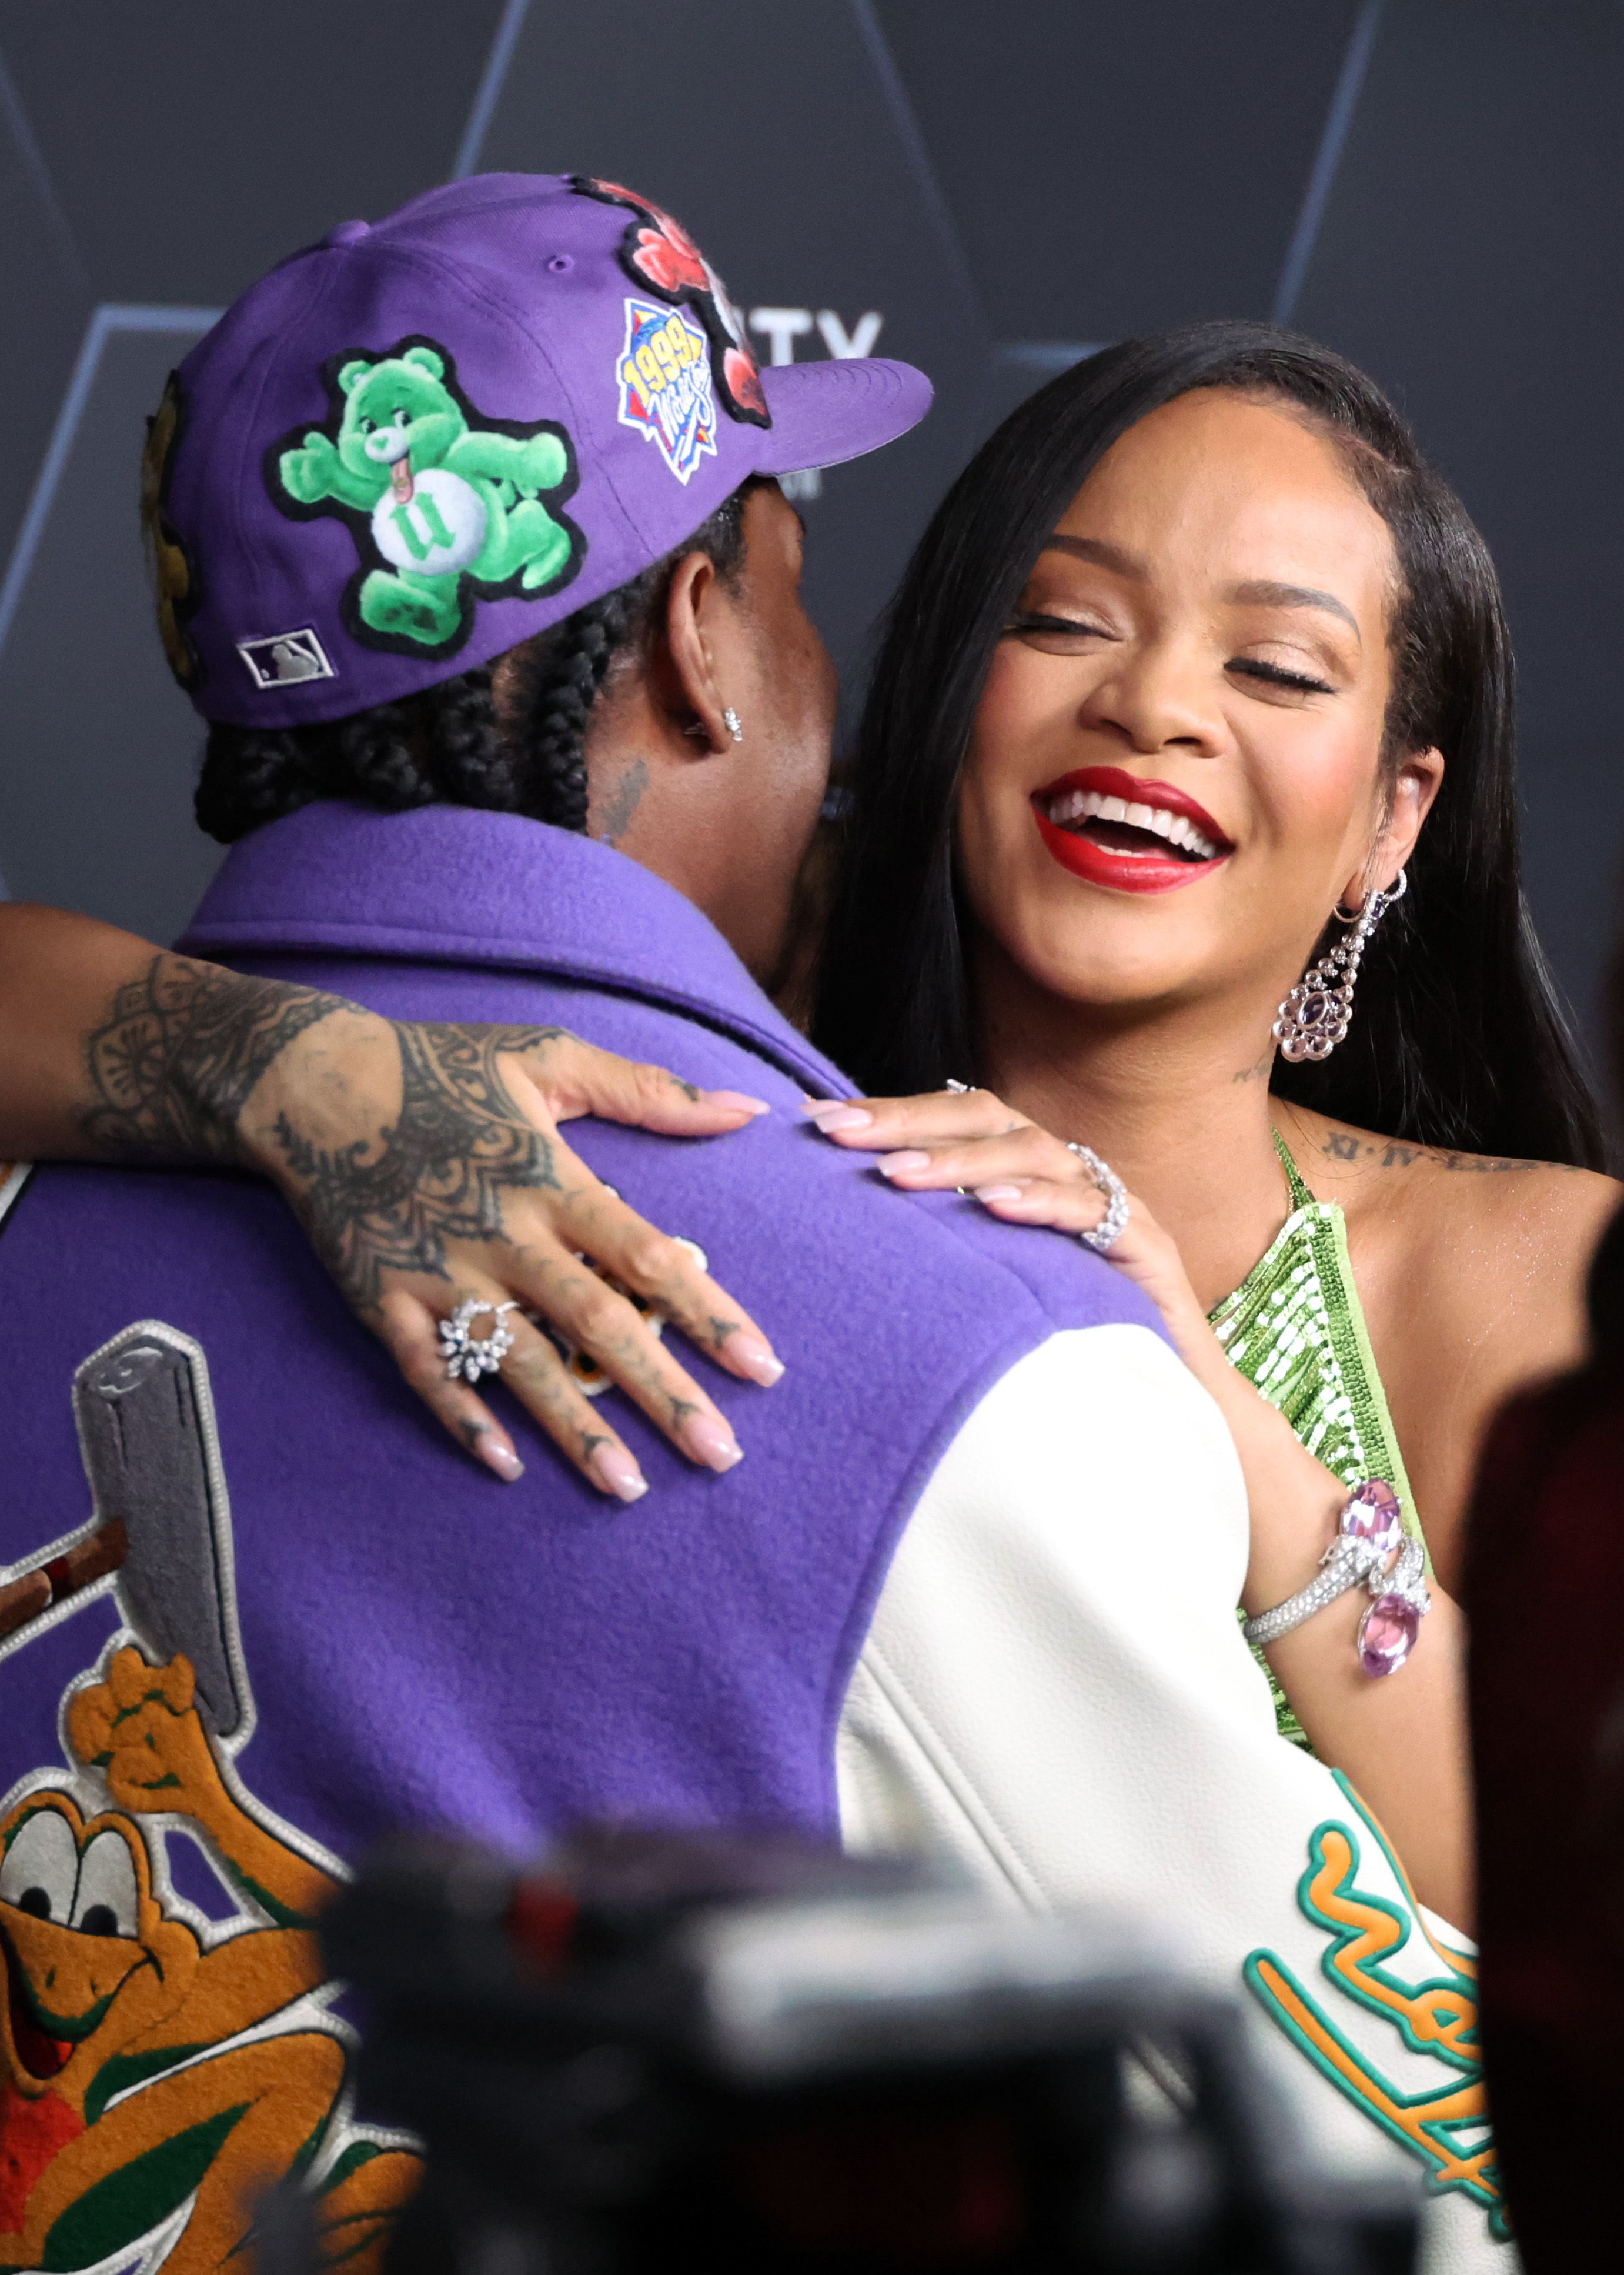 Rihanna and ASAP Rocky Attend Fenty Beauty Event with Rih in